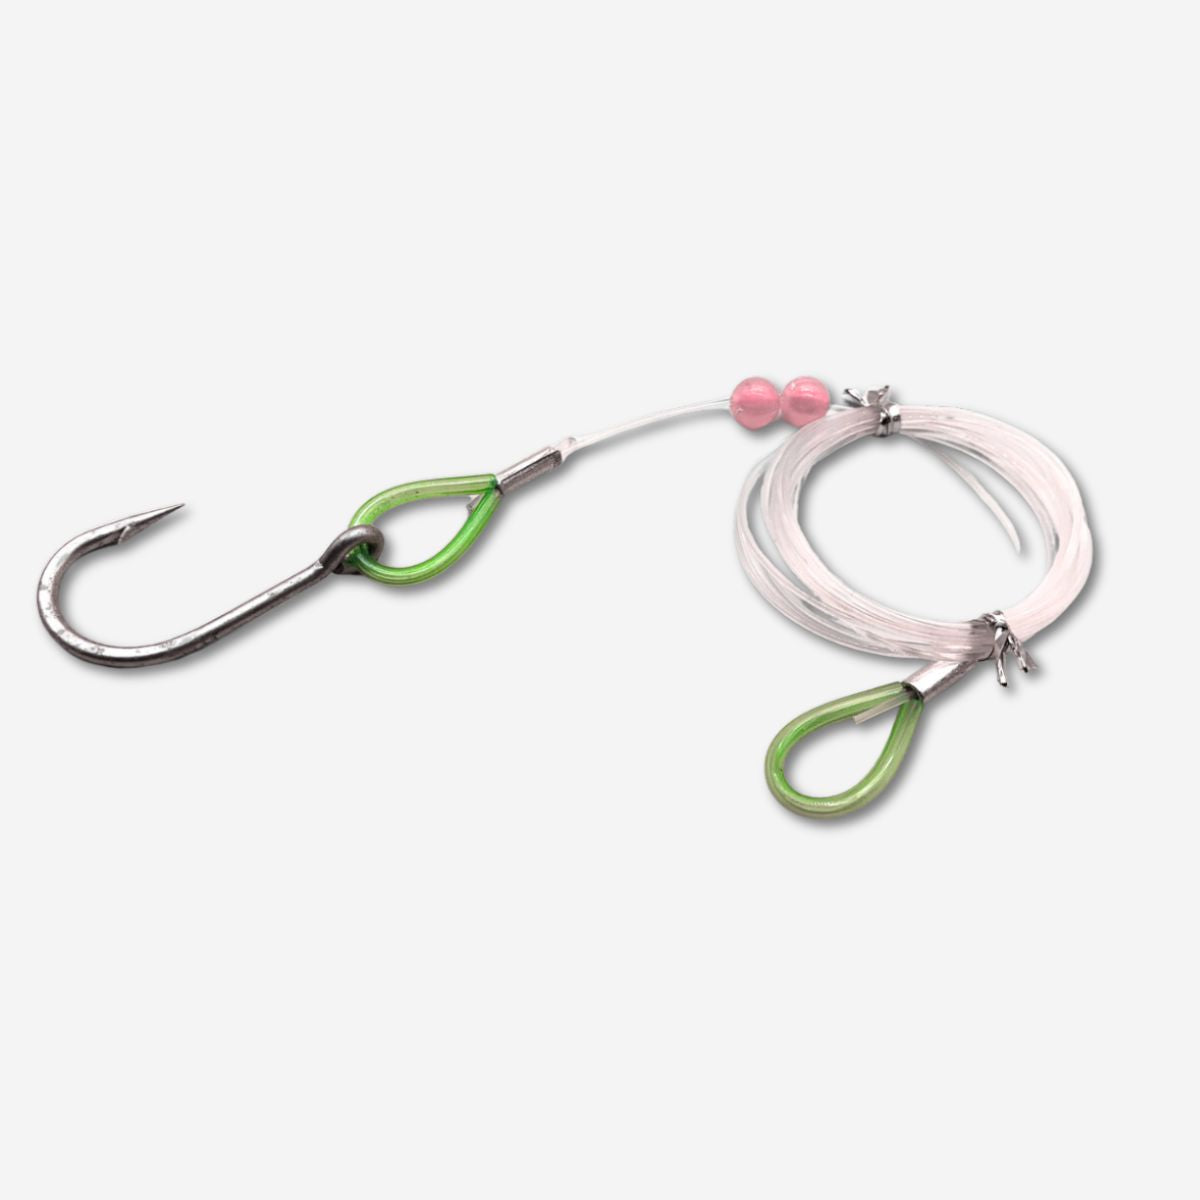 Fishing Hook Set - South East Clearance Centre